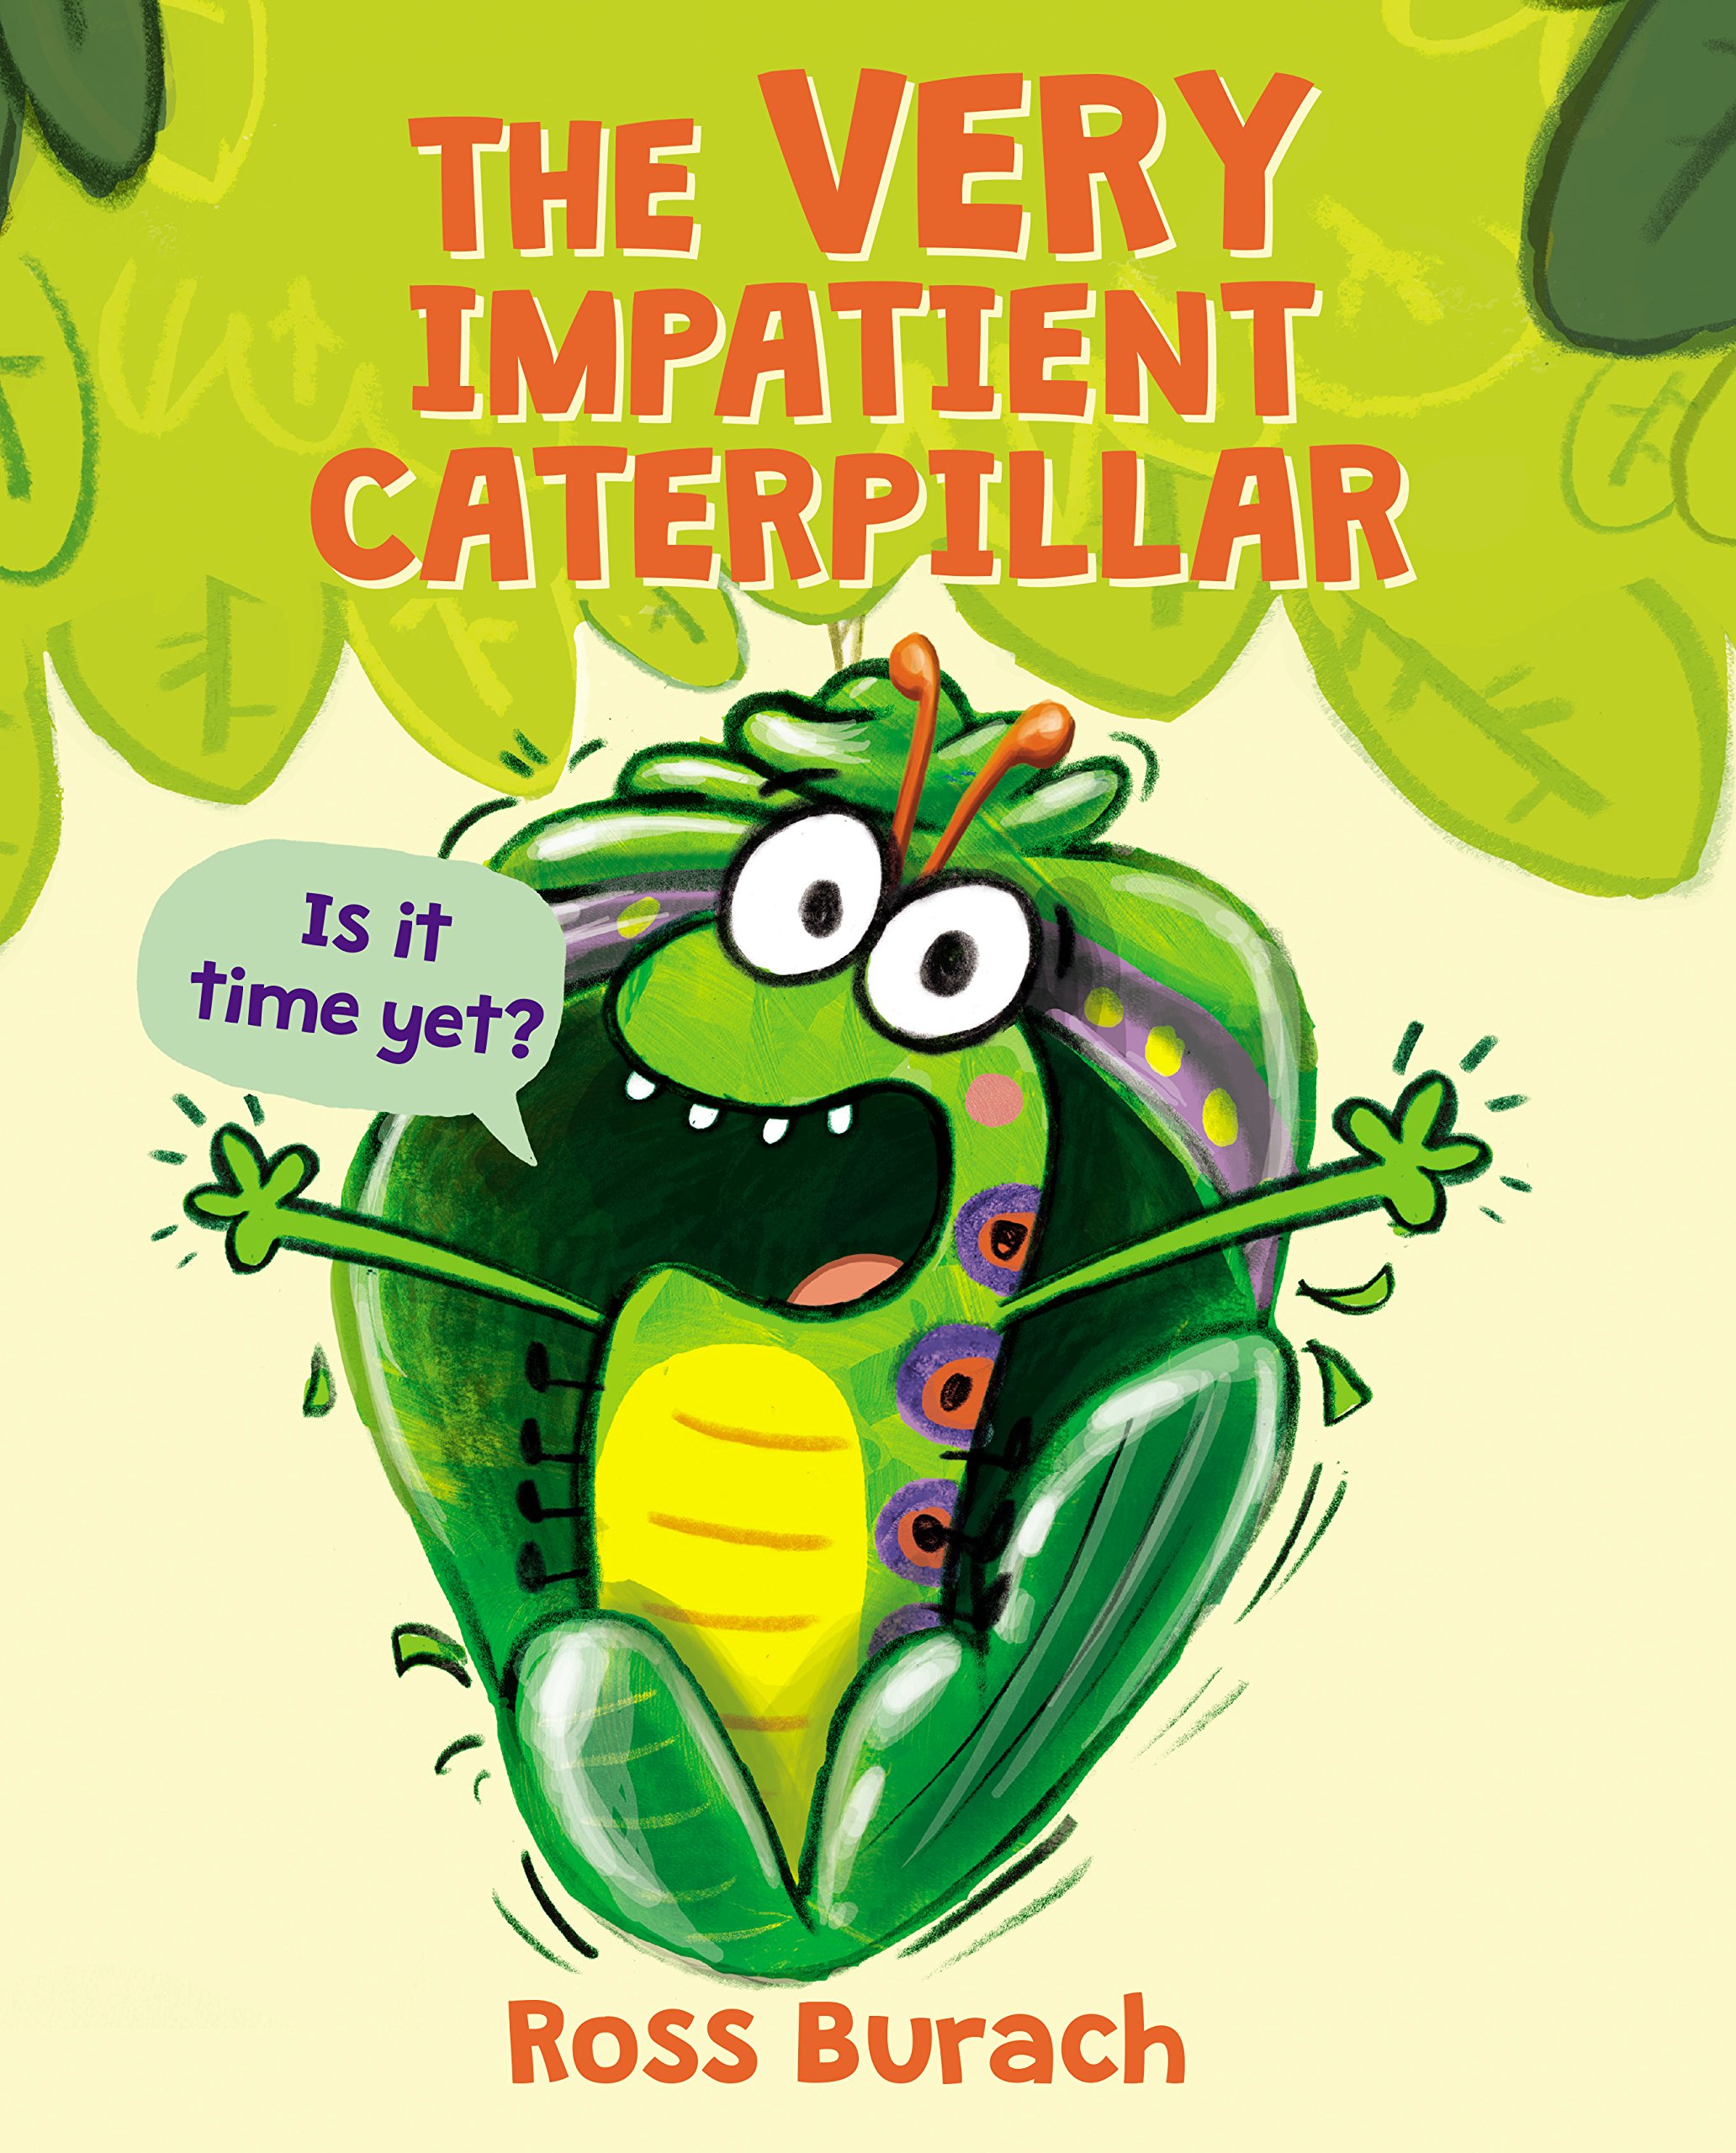 using The Very Impatient Caterpillar in speech therapy